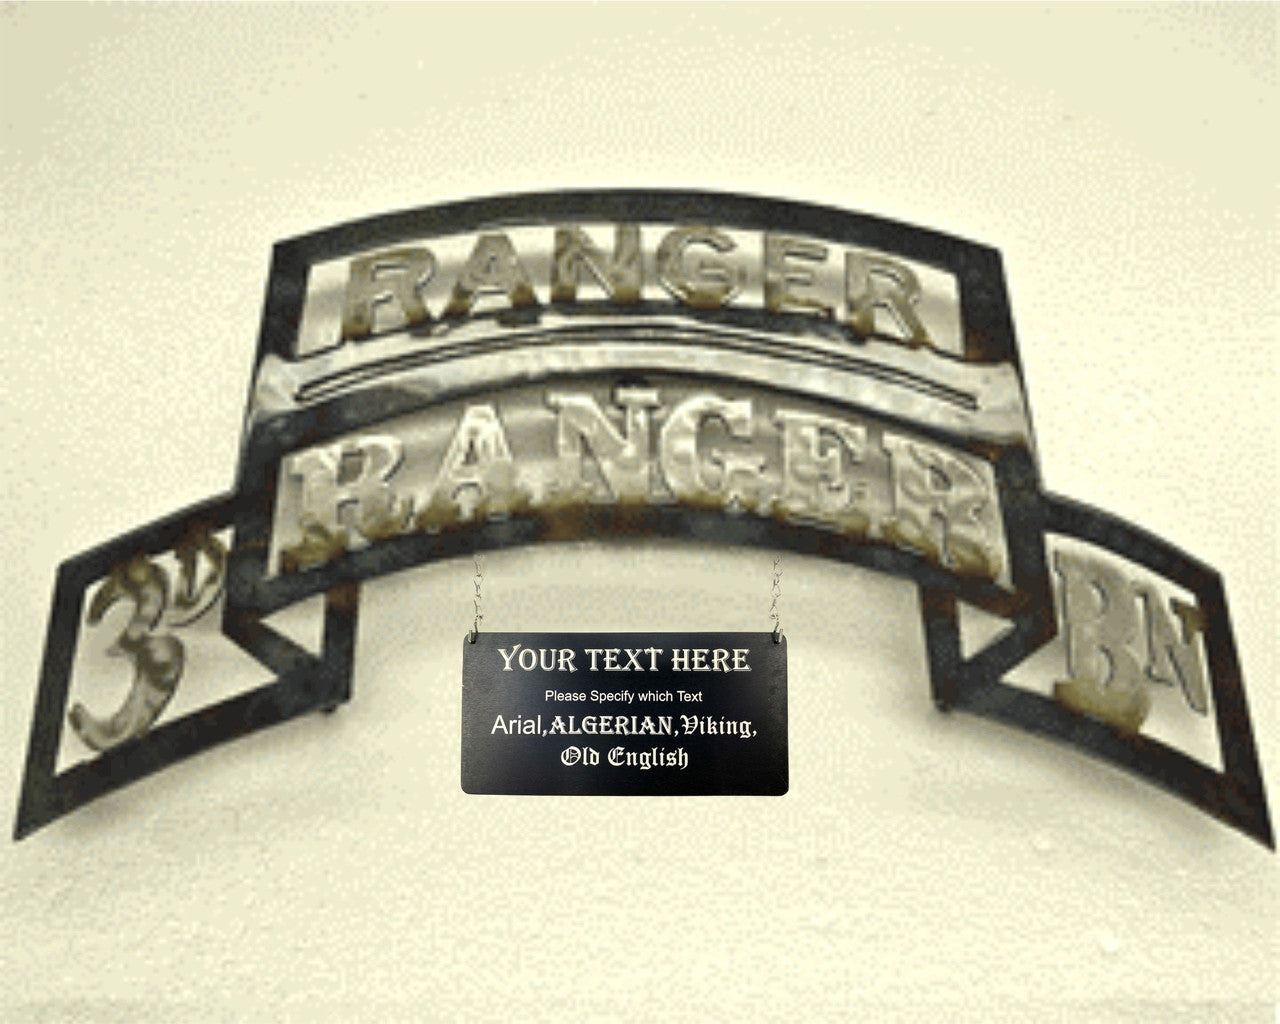 3/75 Ranger Regiment With Tab